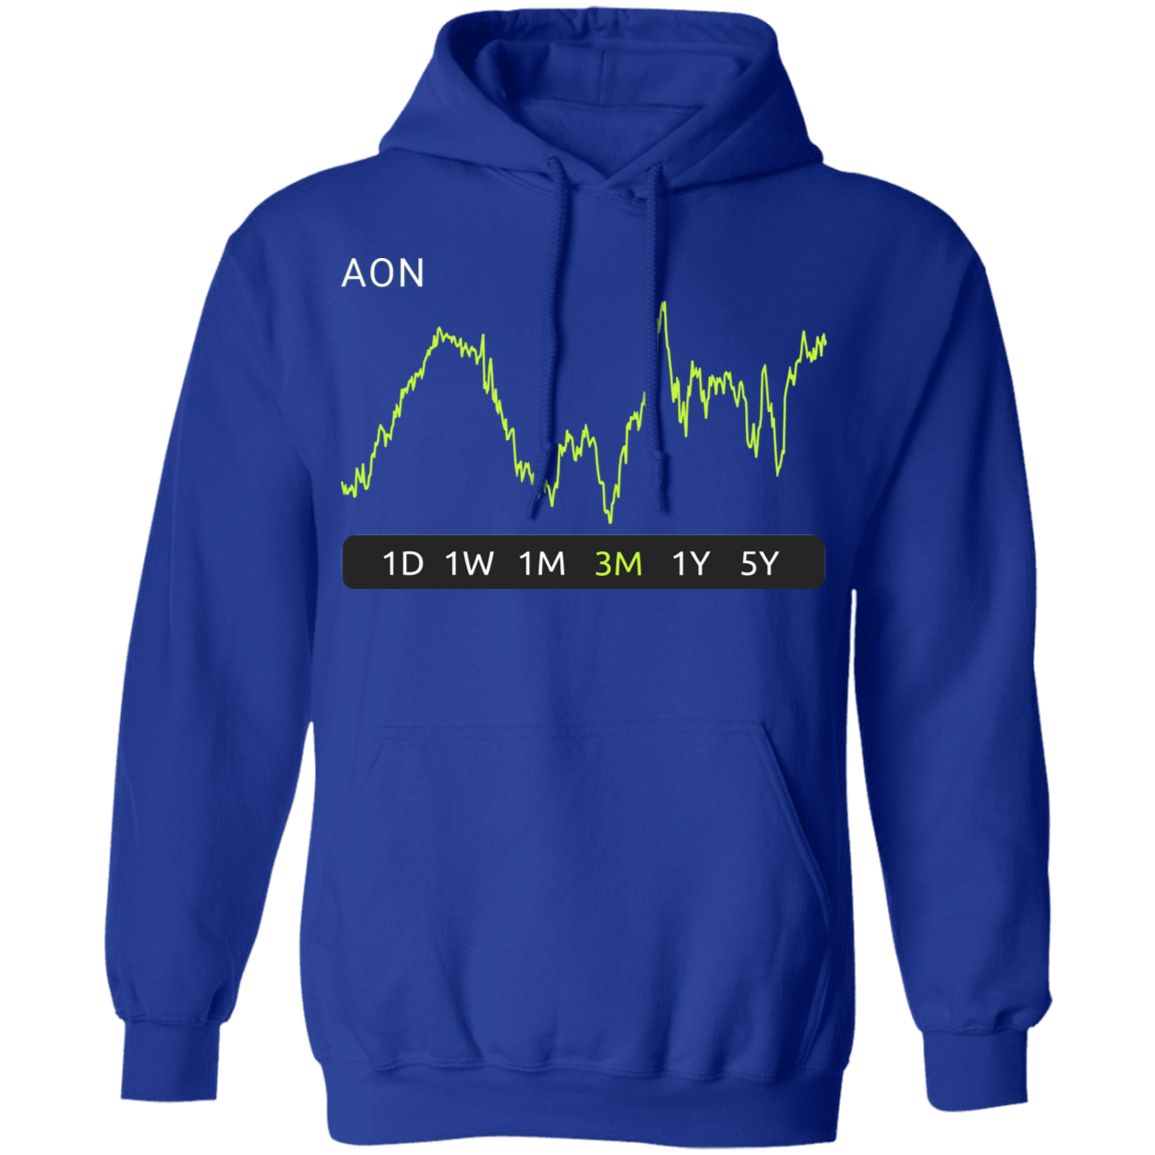 AON Stock 3m Pullover Hoodie